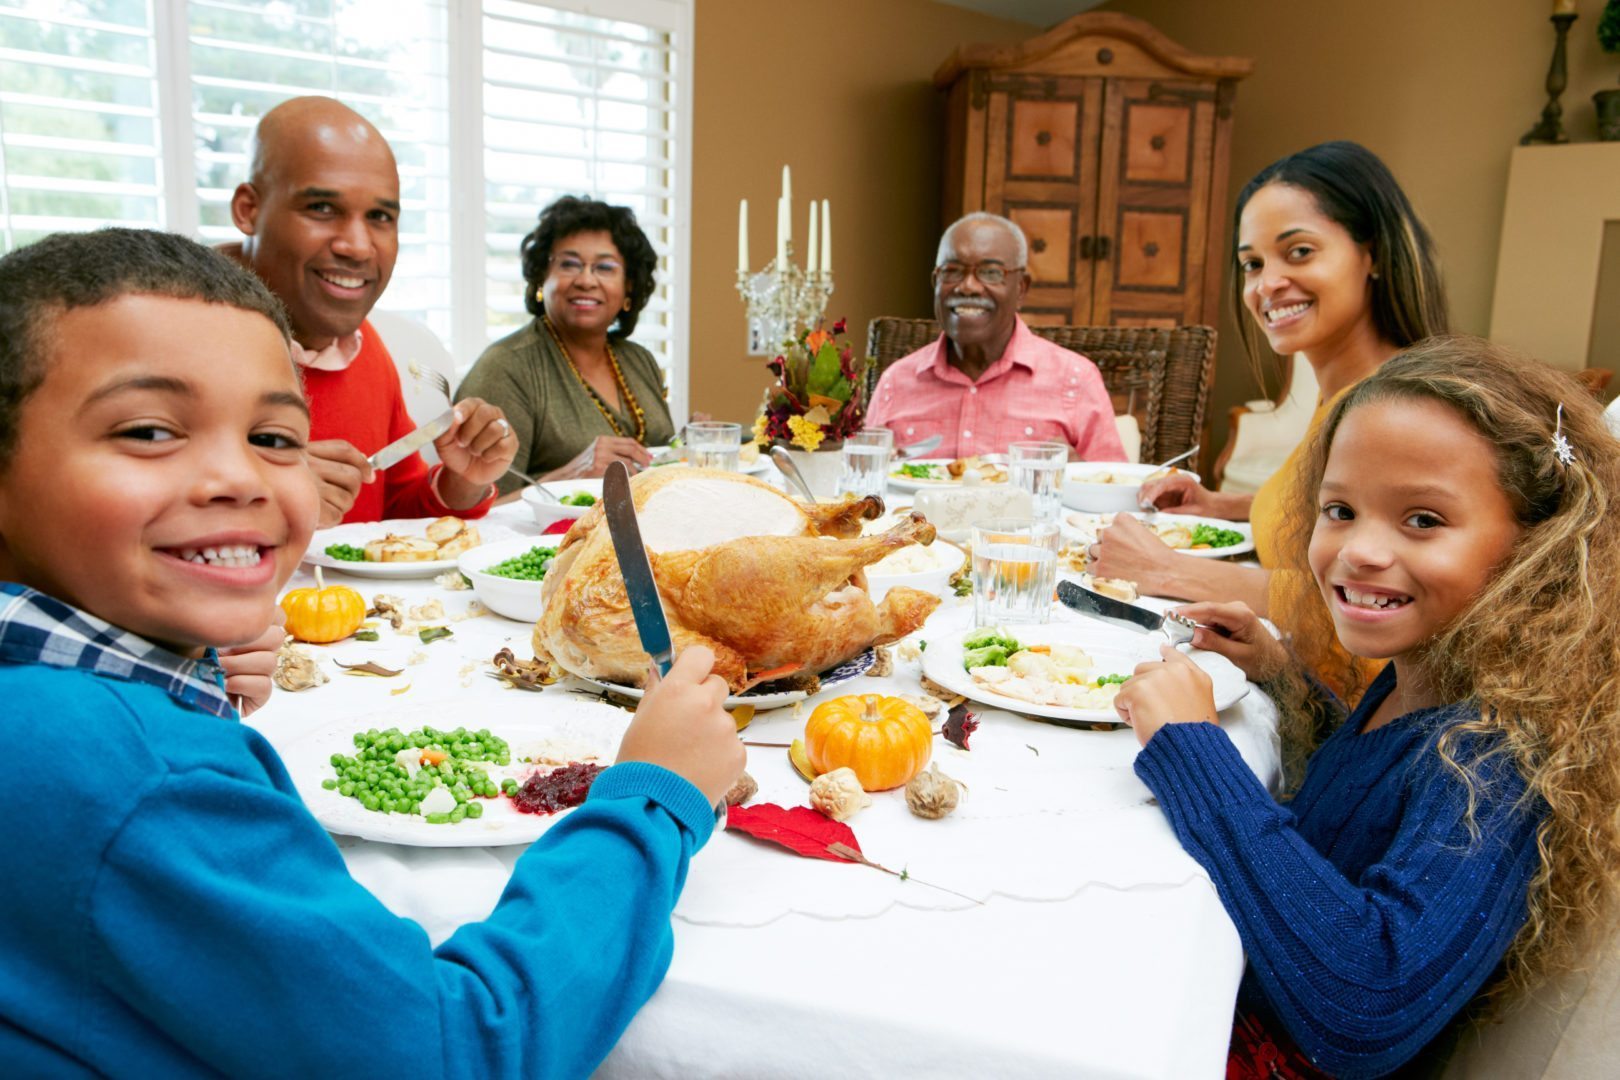 eating together with family essay